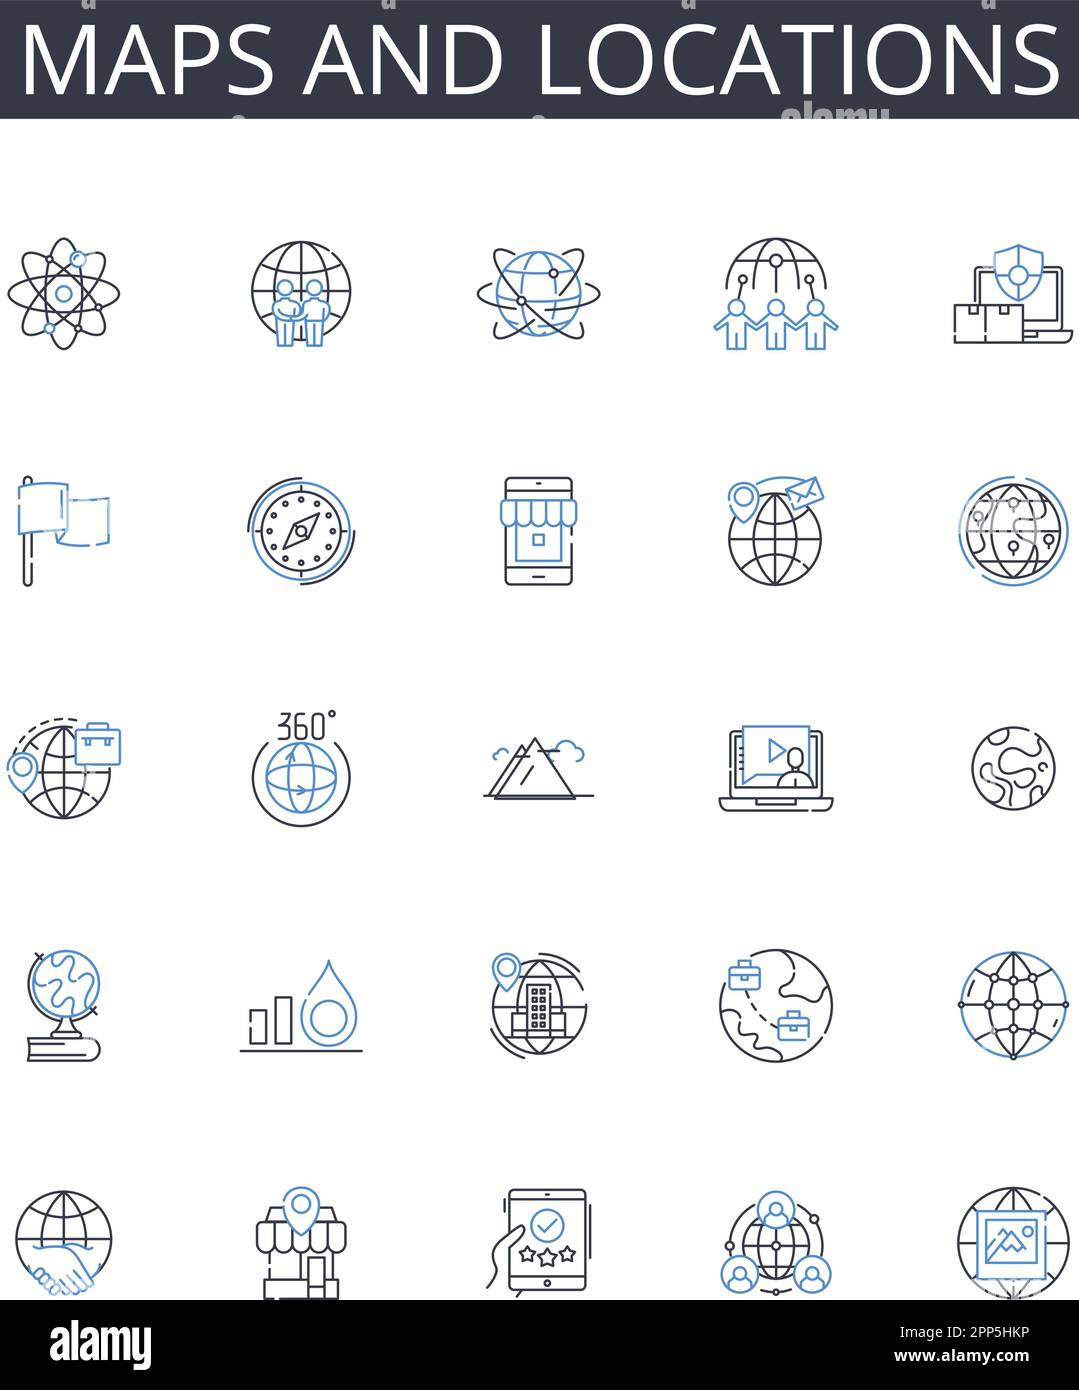 Maps and locations line icons collection. Cartography, Geolocation, Topography, Atlas, Navigation, Terrain, Geocaching vector and linear illustration Stock Vector